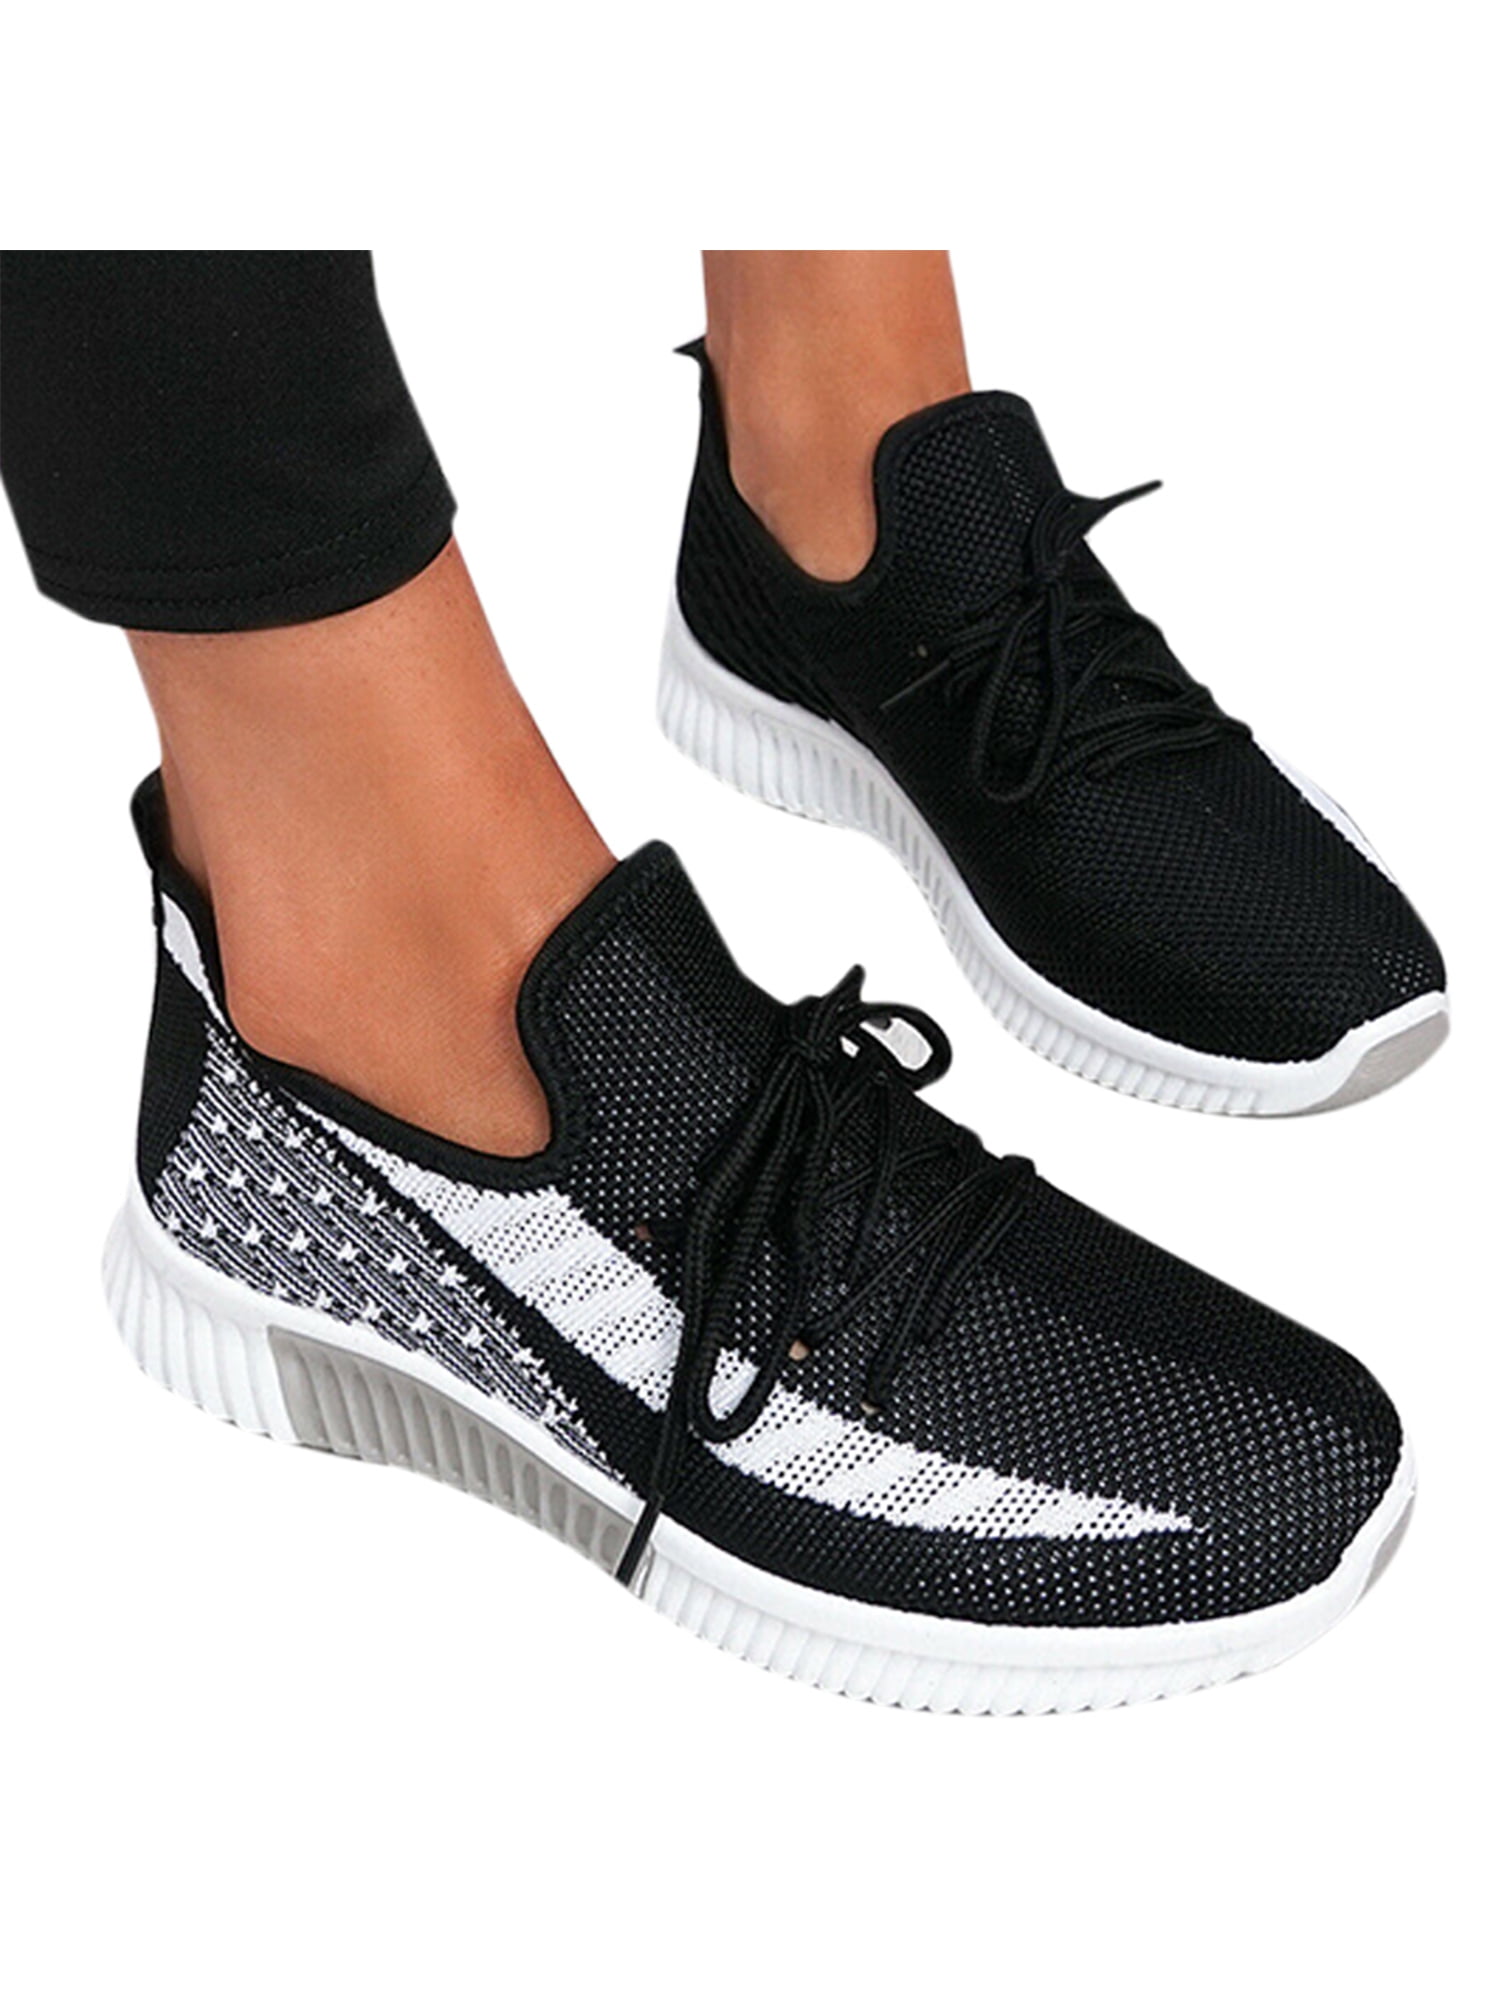 Women Breathable Fashion Sports Shoes Lace Up Gym Running Casual Outwear Sneaker 